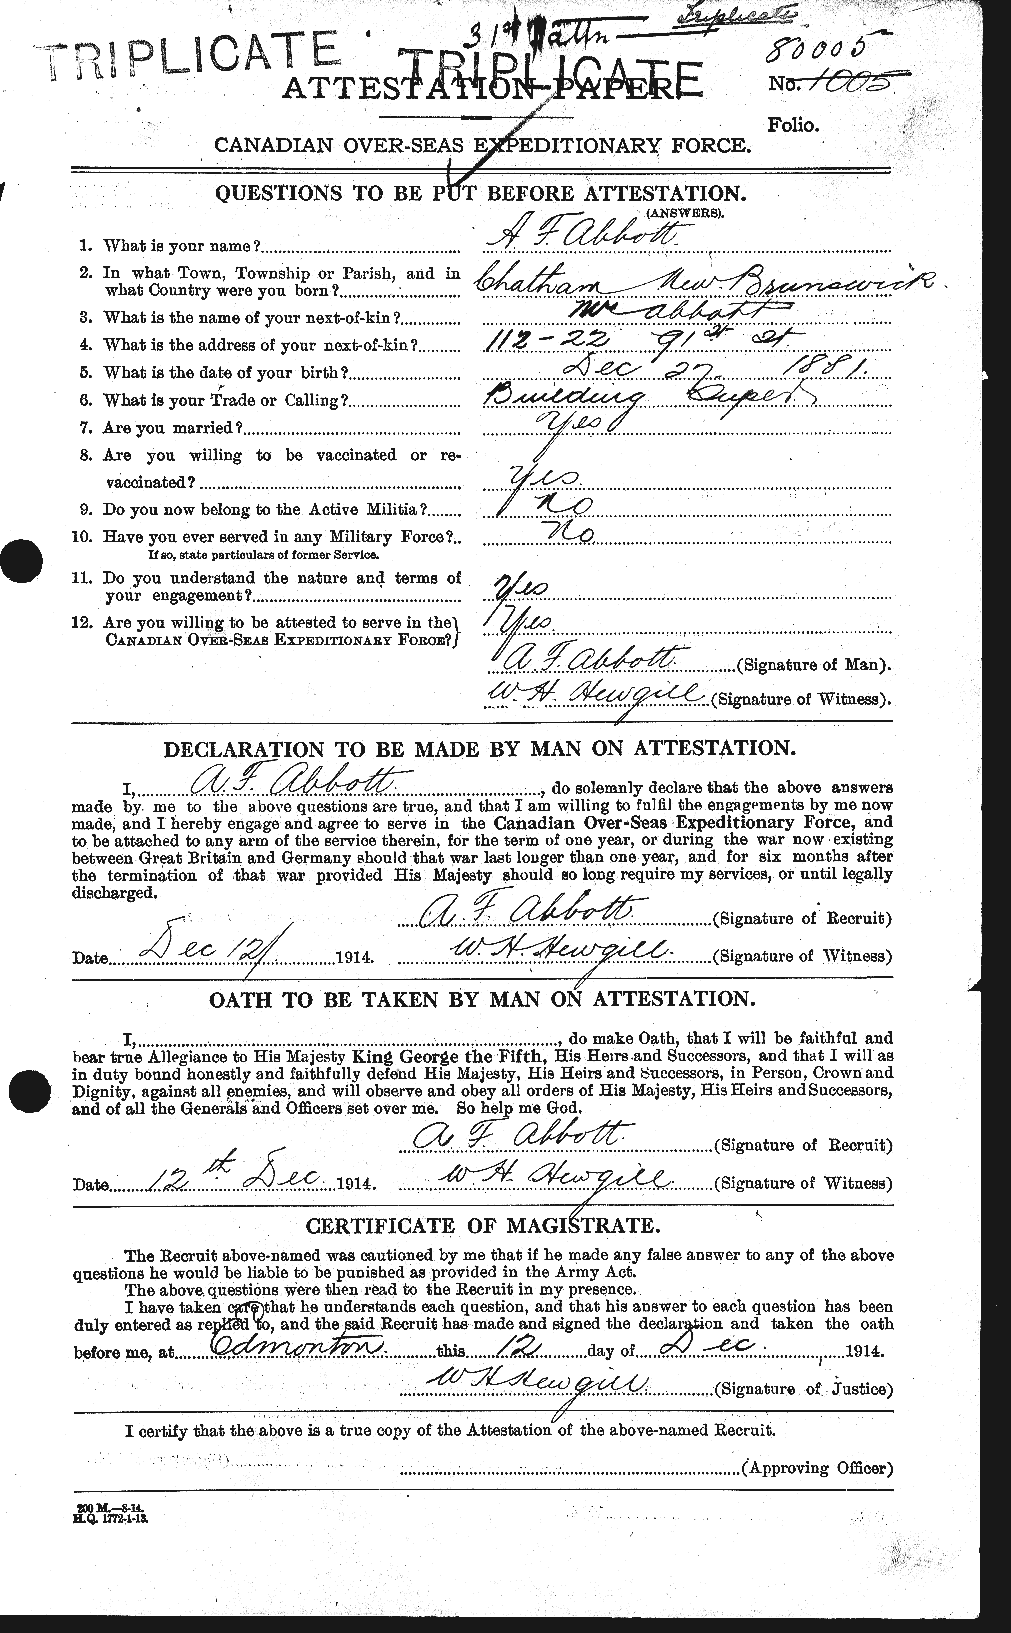 Personnel Records of the First World War - CEF 200802a